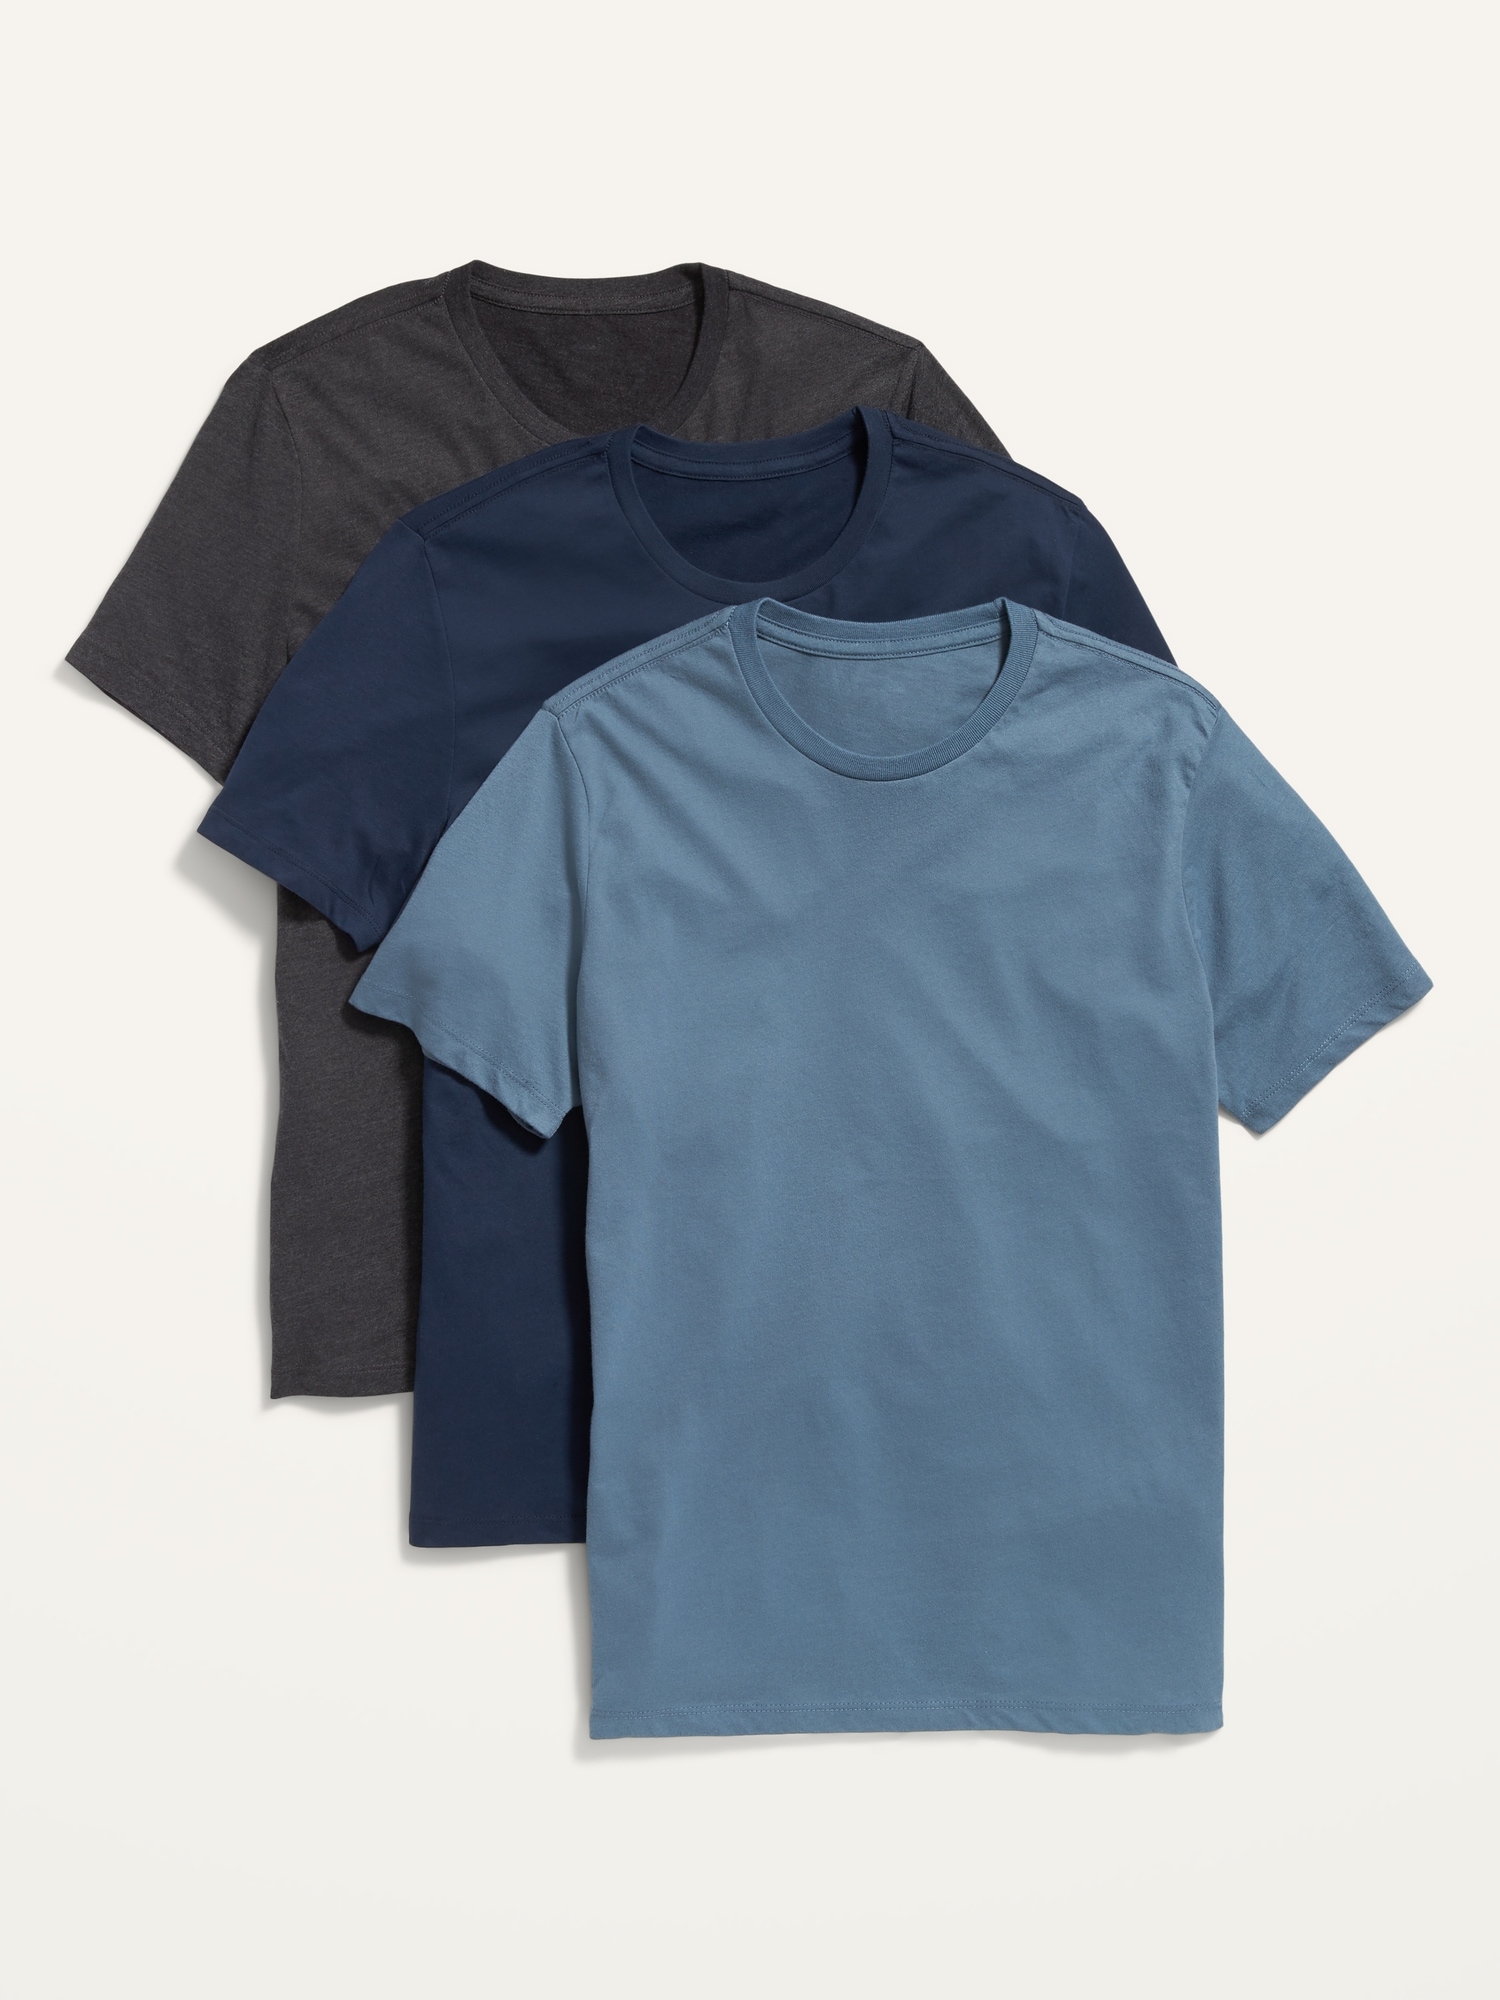 Soft-Washed Crew-Neck Tee 3-Pack for Men